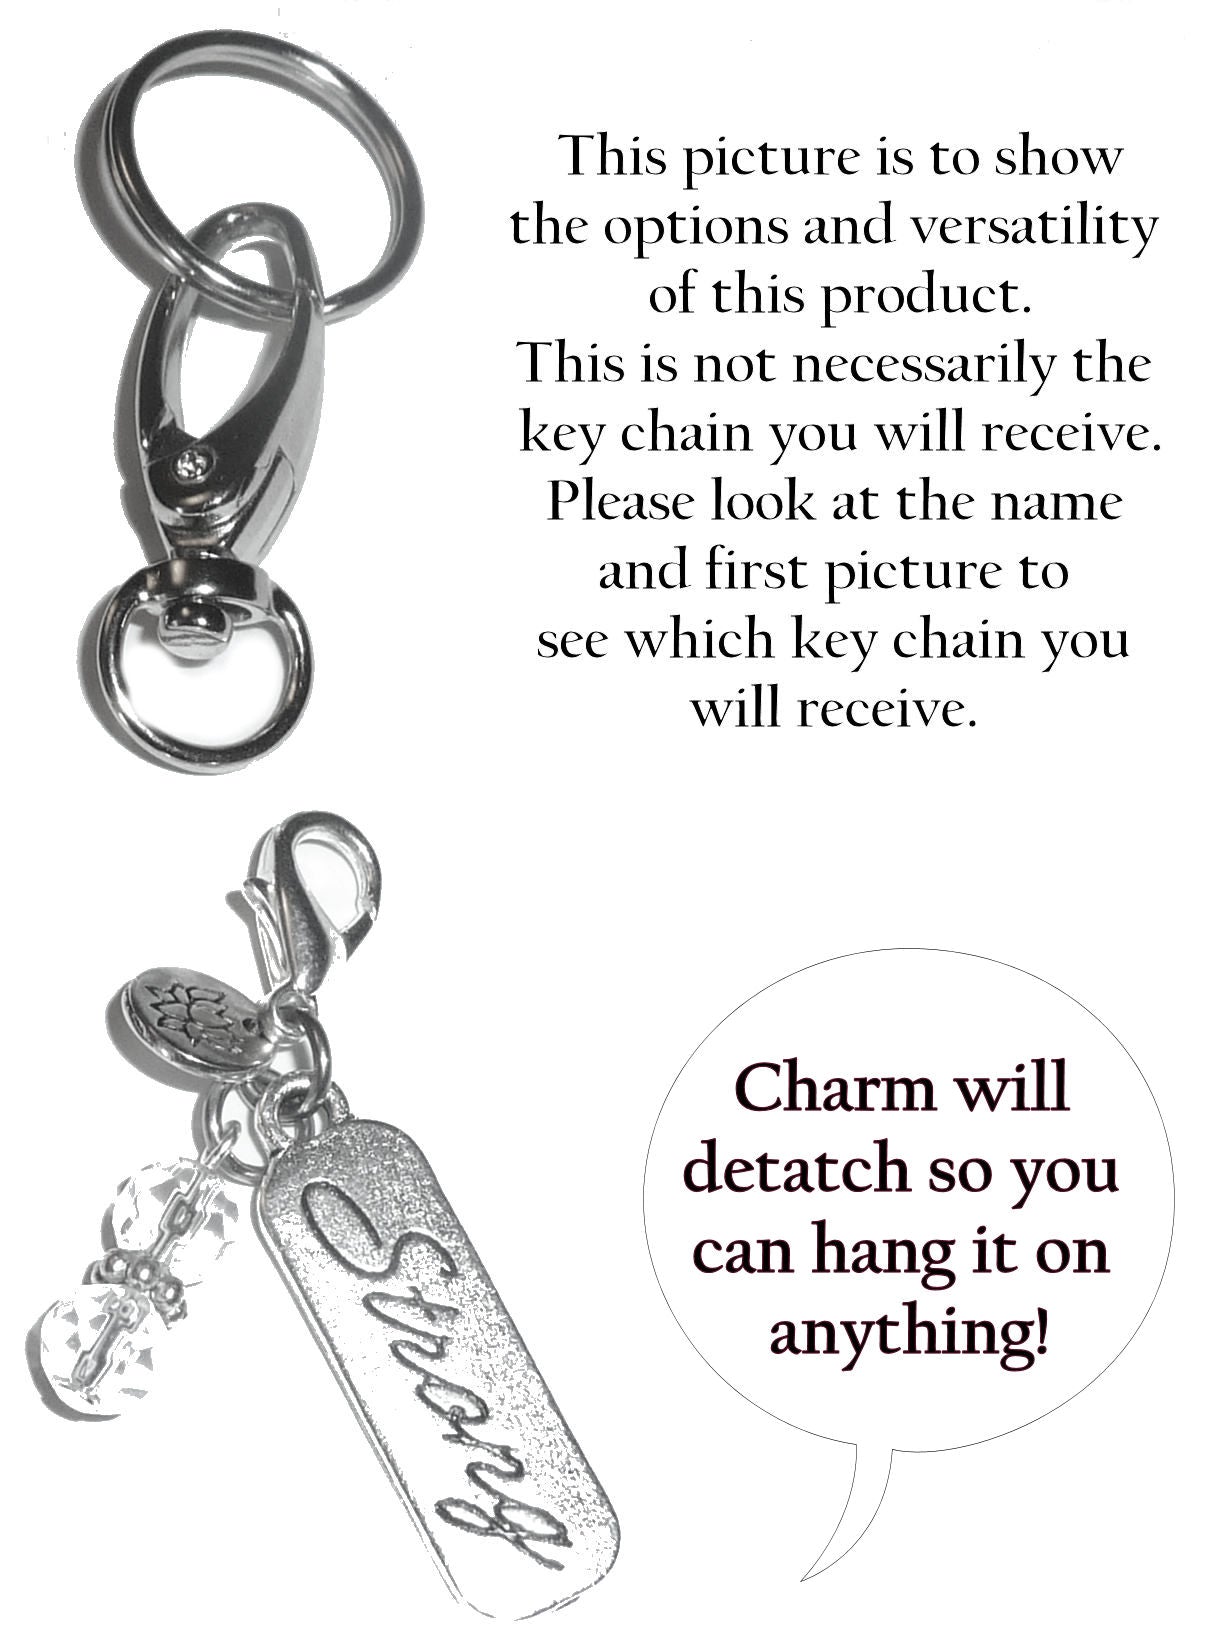 (Love My Dog) Charm Key Chain Ring, Women's Purse or Necklace Charm, Comes in a Gift Box!